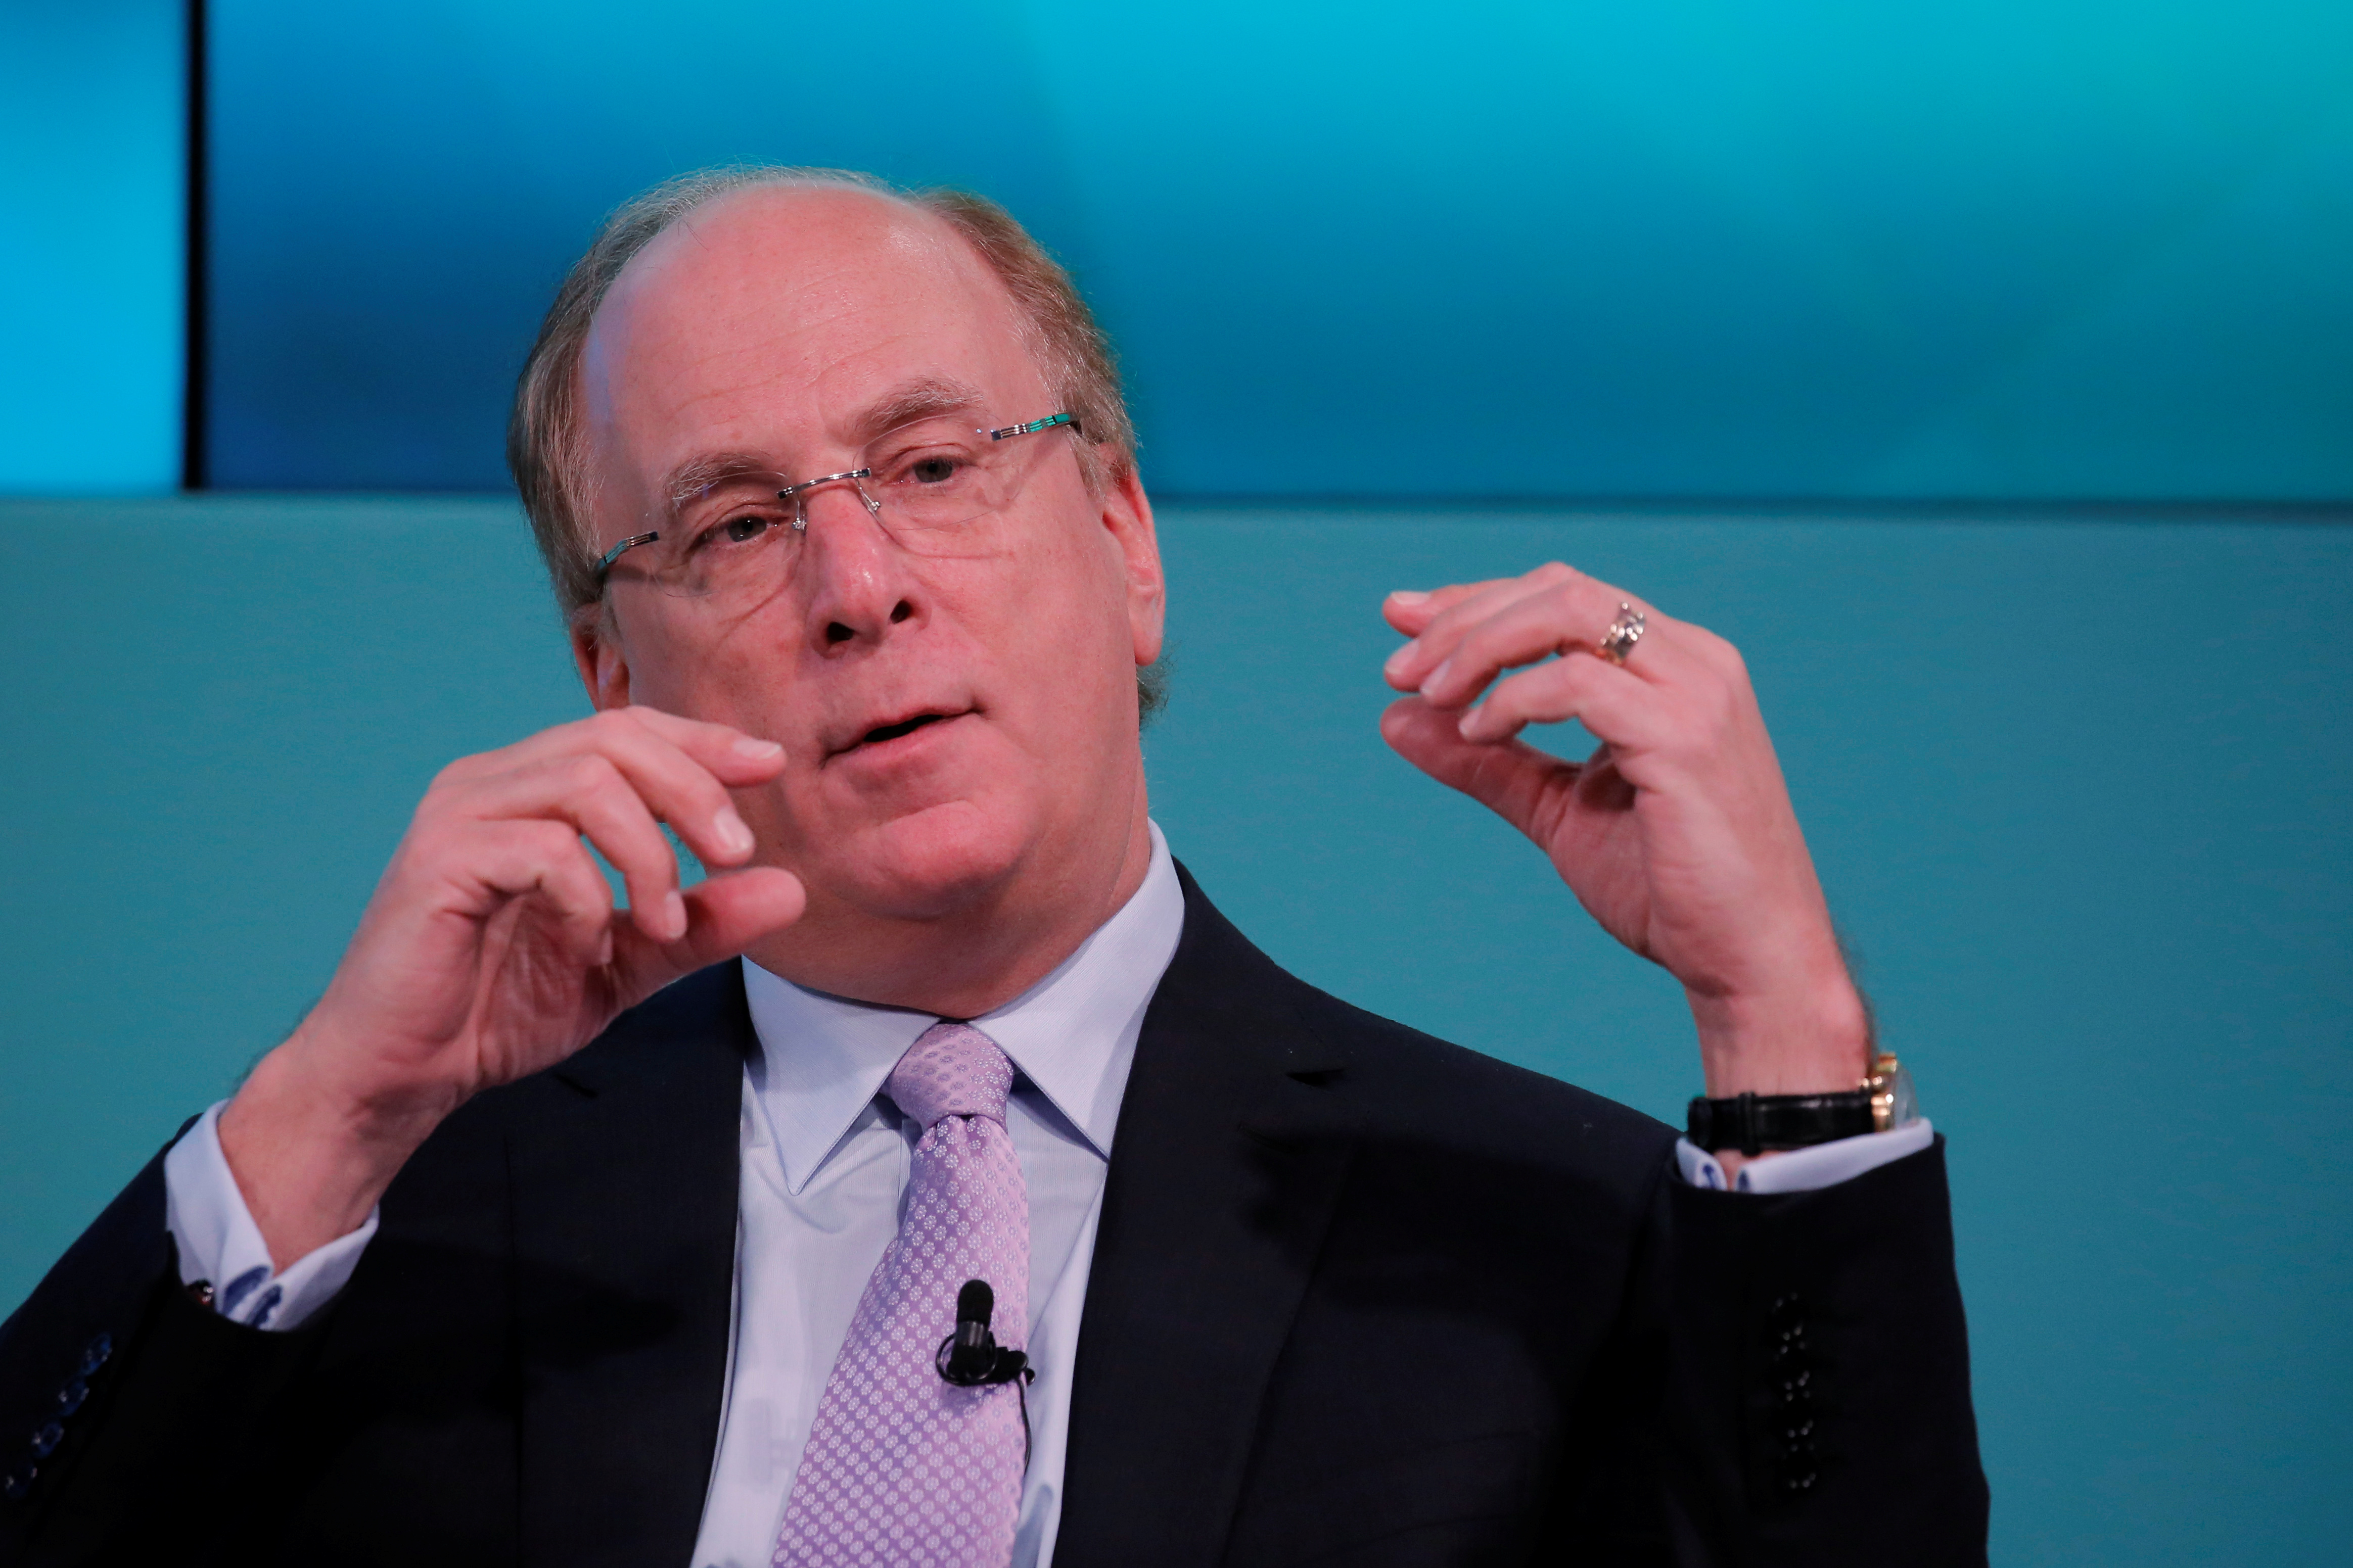 Larry Fink, Chief Executive Officer of BlackRock, takes part in the Yahoo Finance All Markets Summit in New York, February 8, 2017.